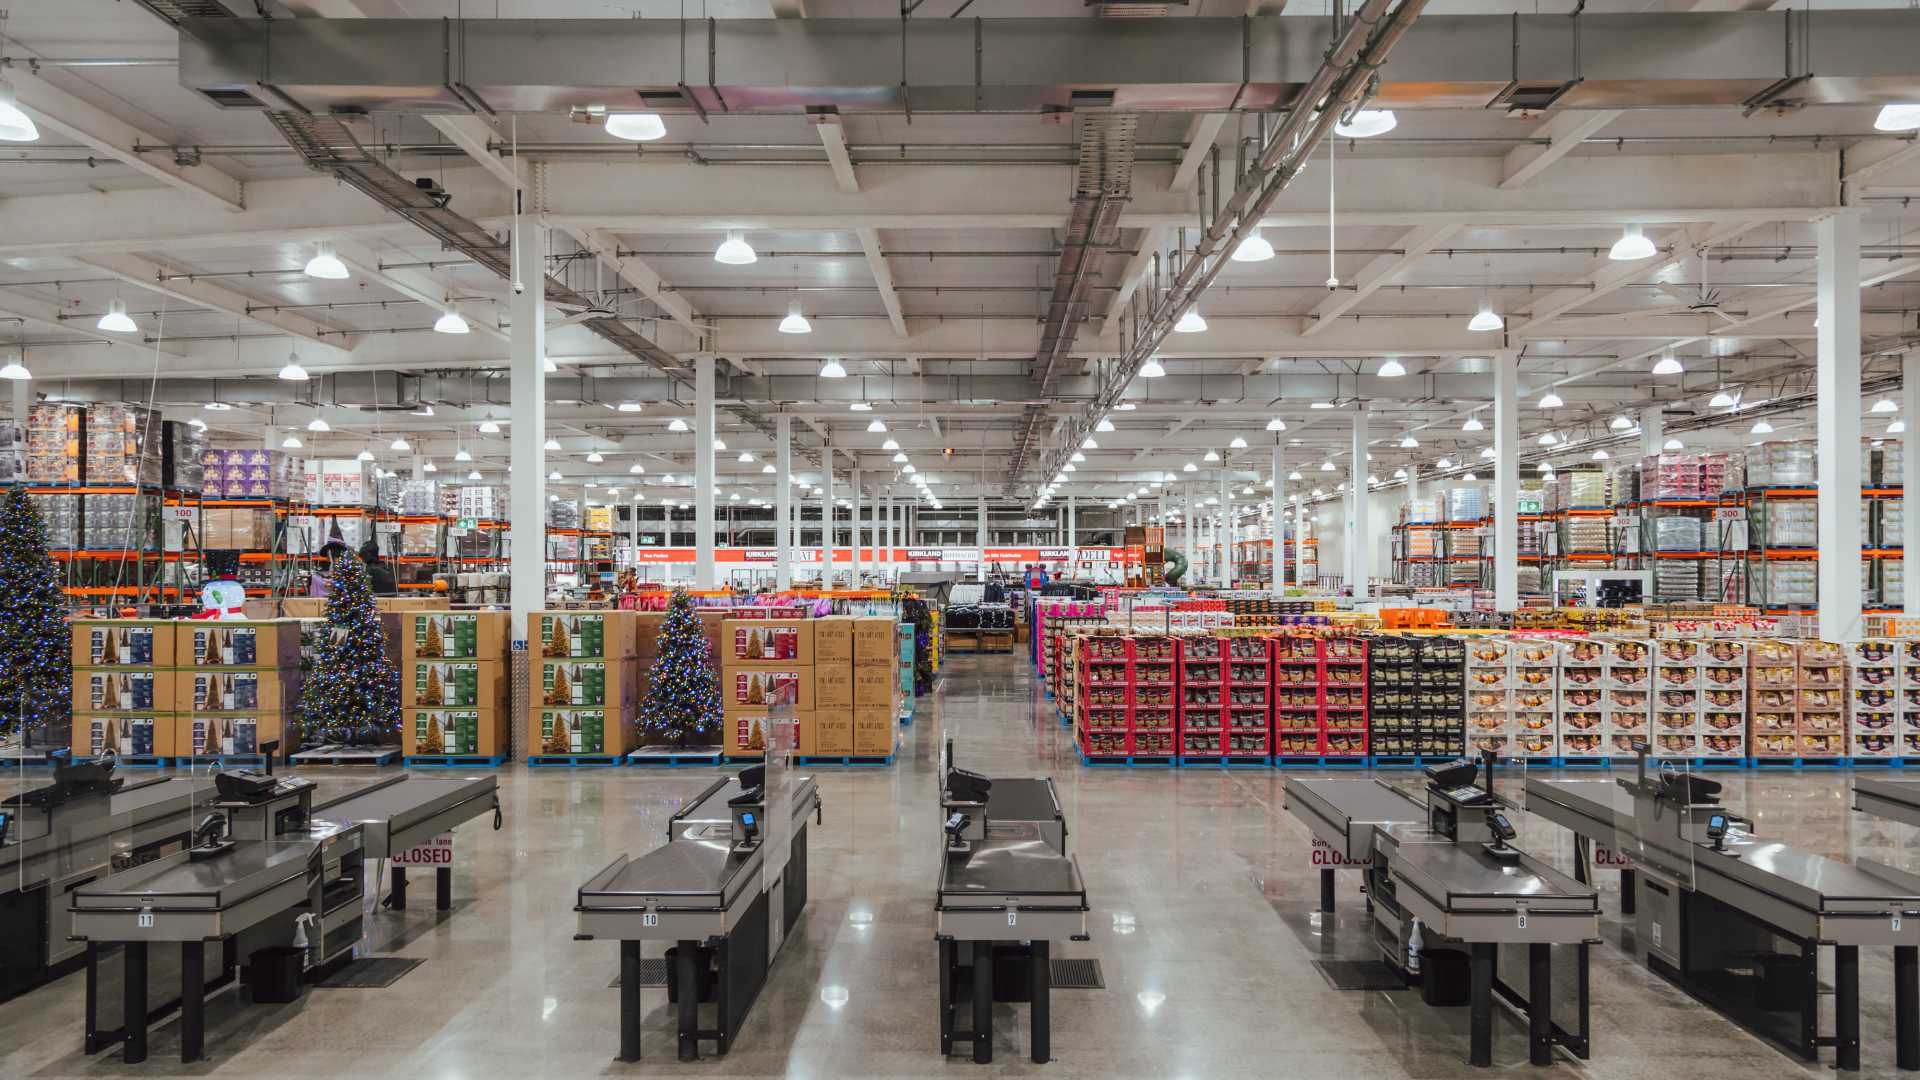 New Zealand's First $100 Million Costco Is Opening This Week — Here's What to Expect